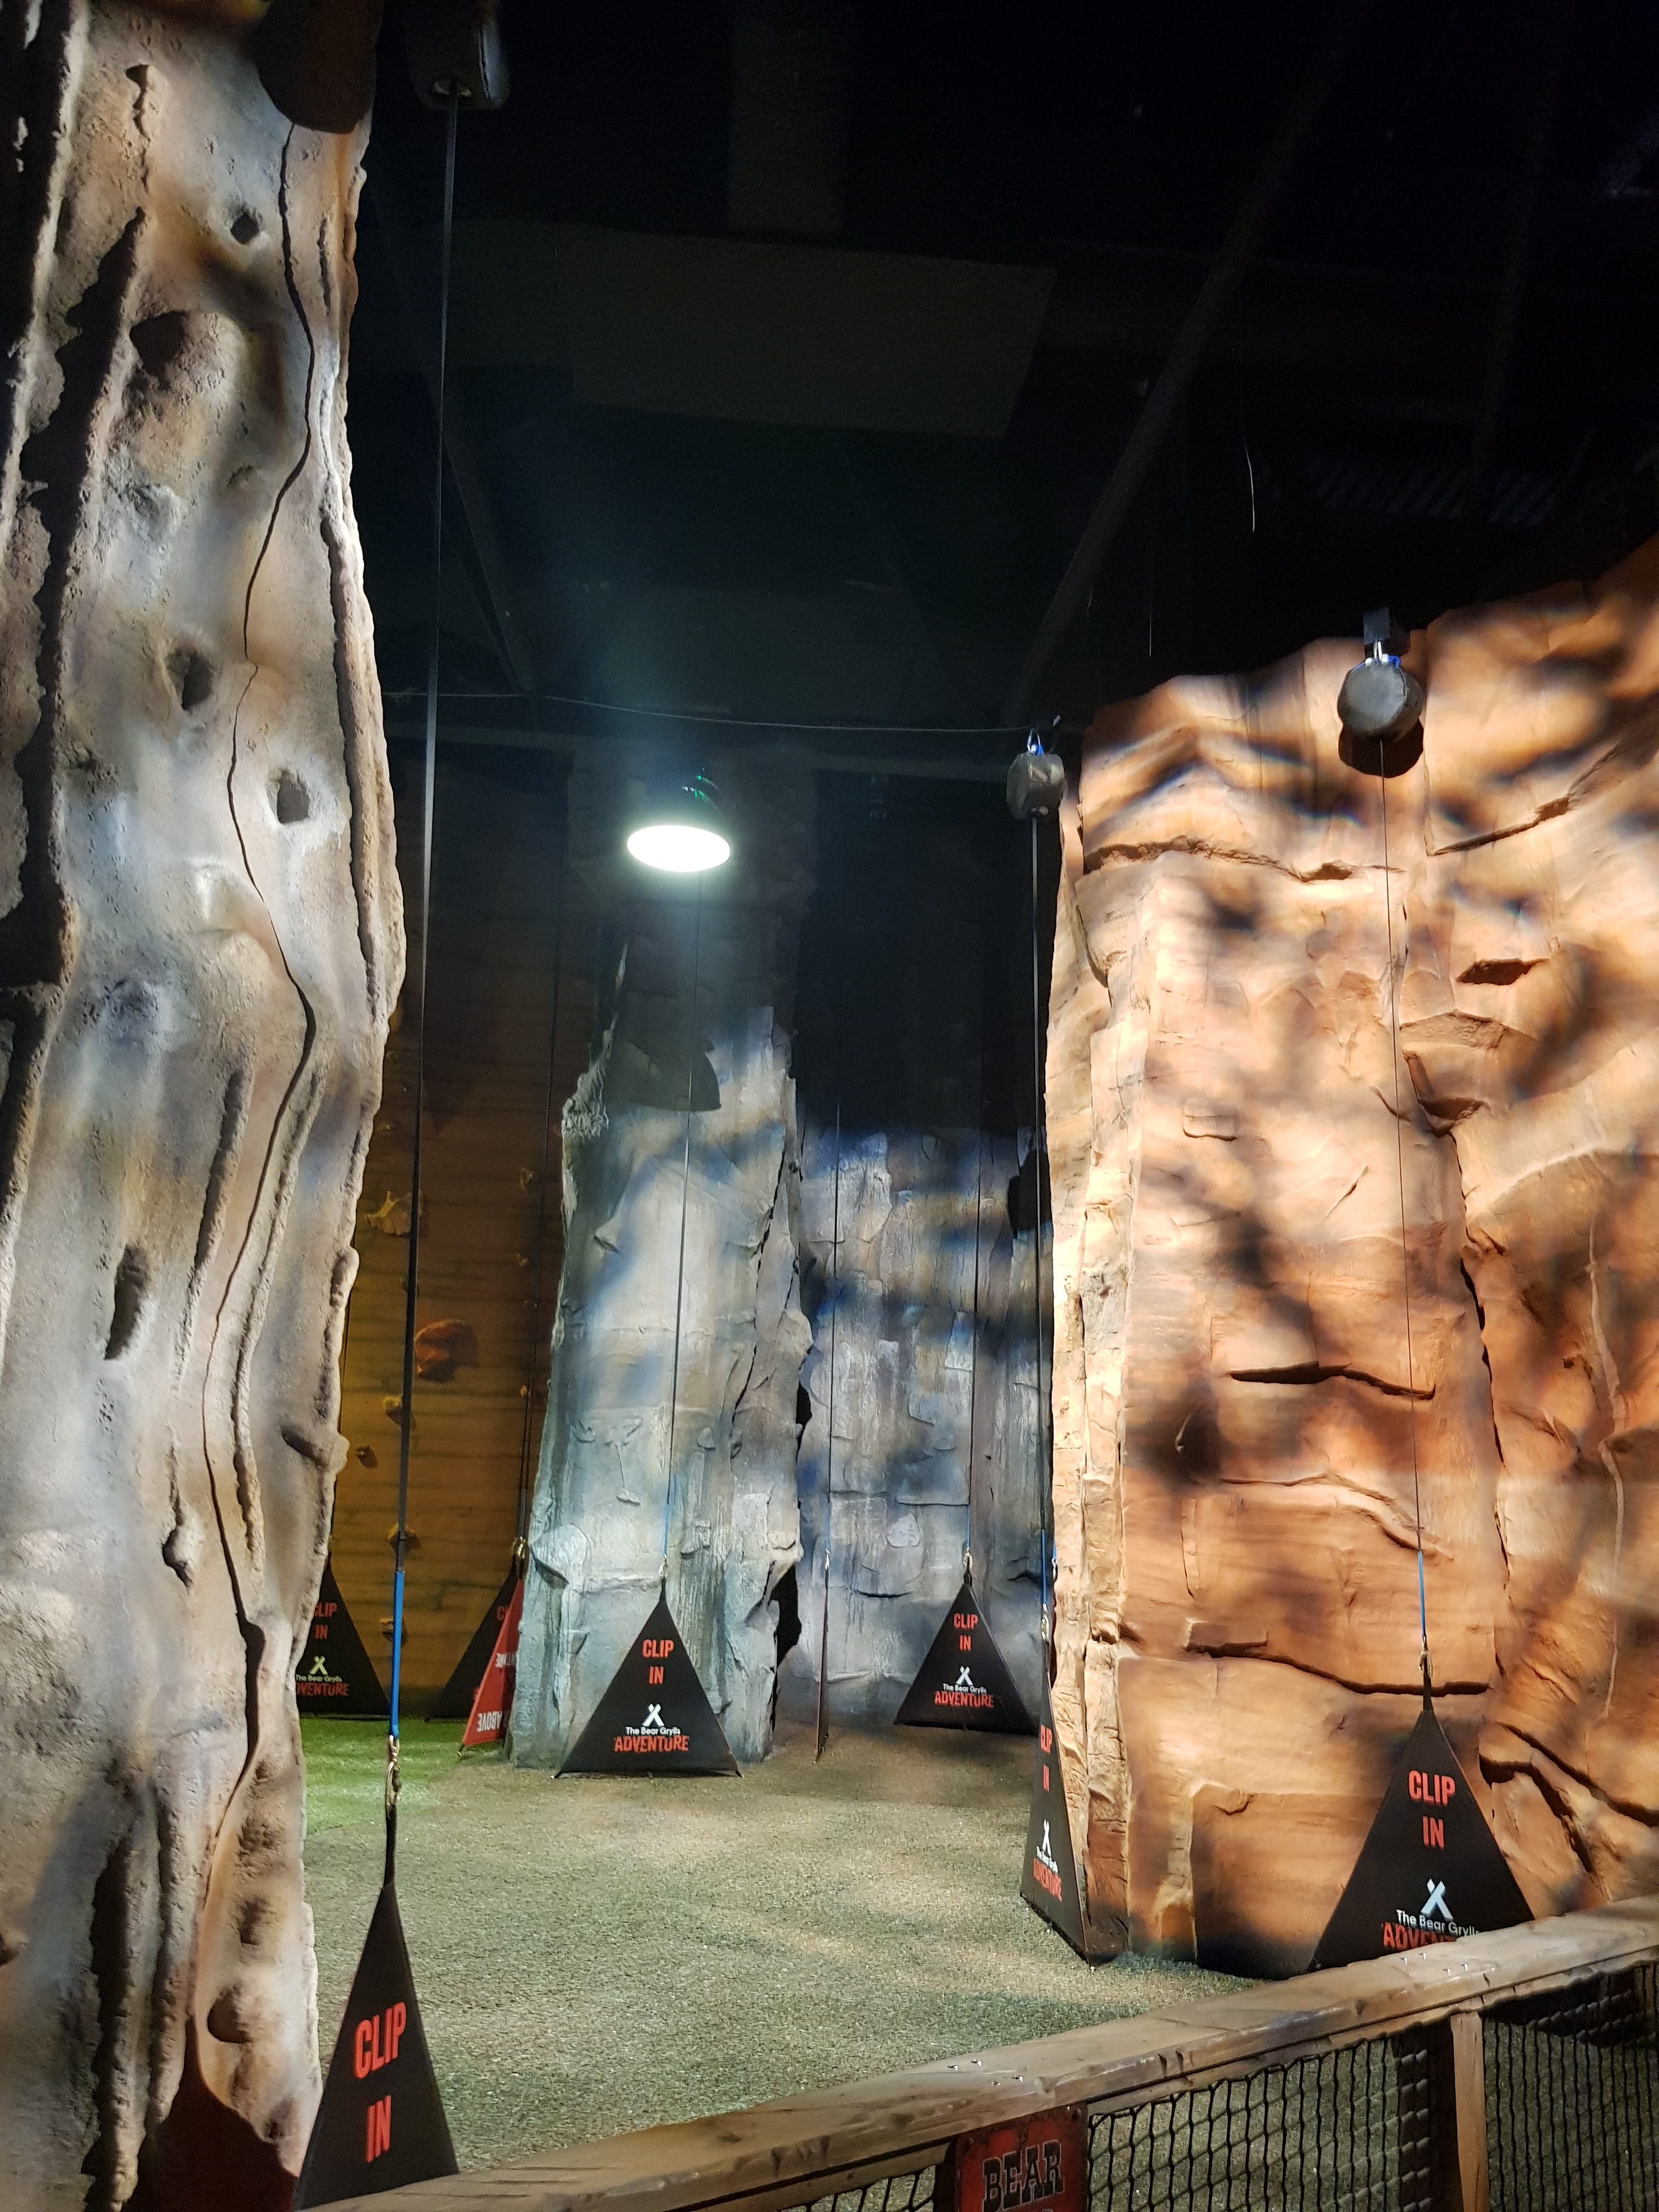 Adrenaline Rush Activities. Some of the more difficult climbing walls designed to look like real rock faces with bumbs and ridges in brown and grey colours.